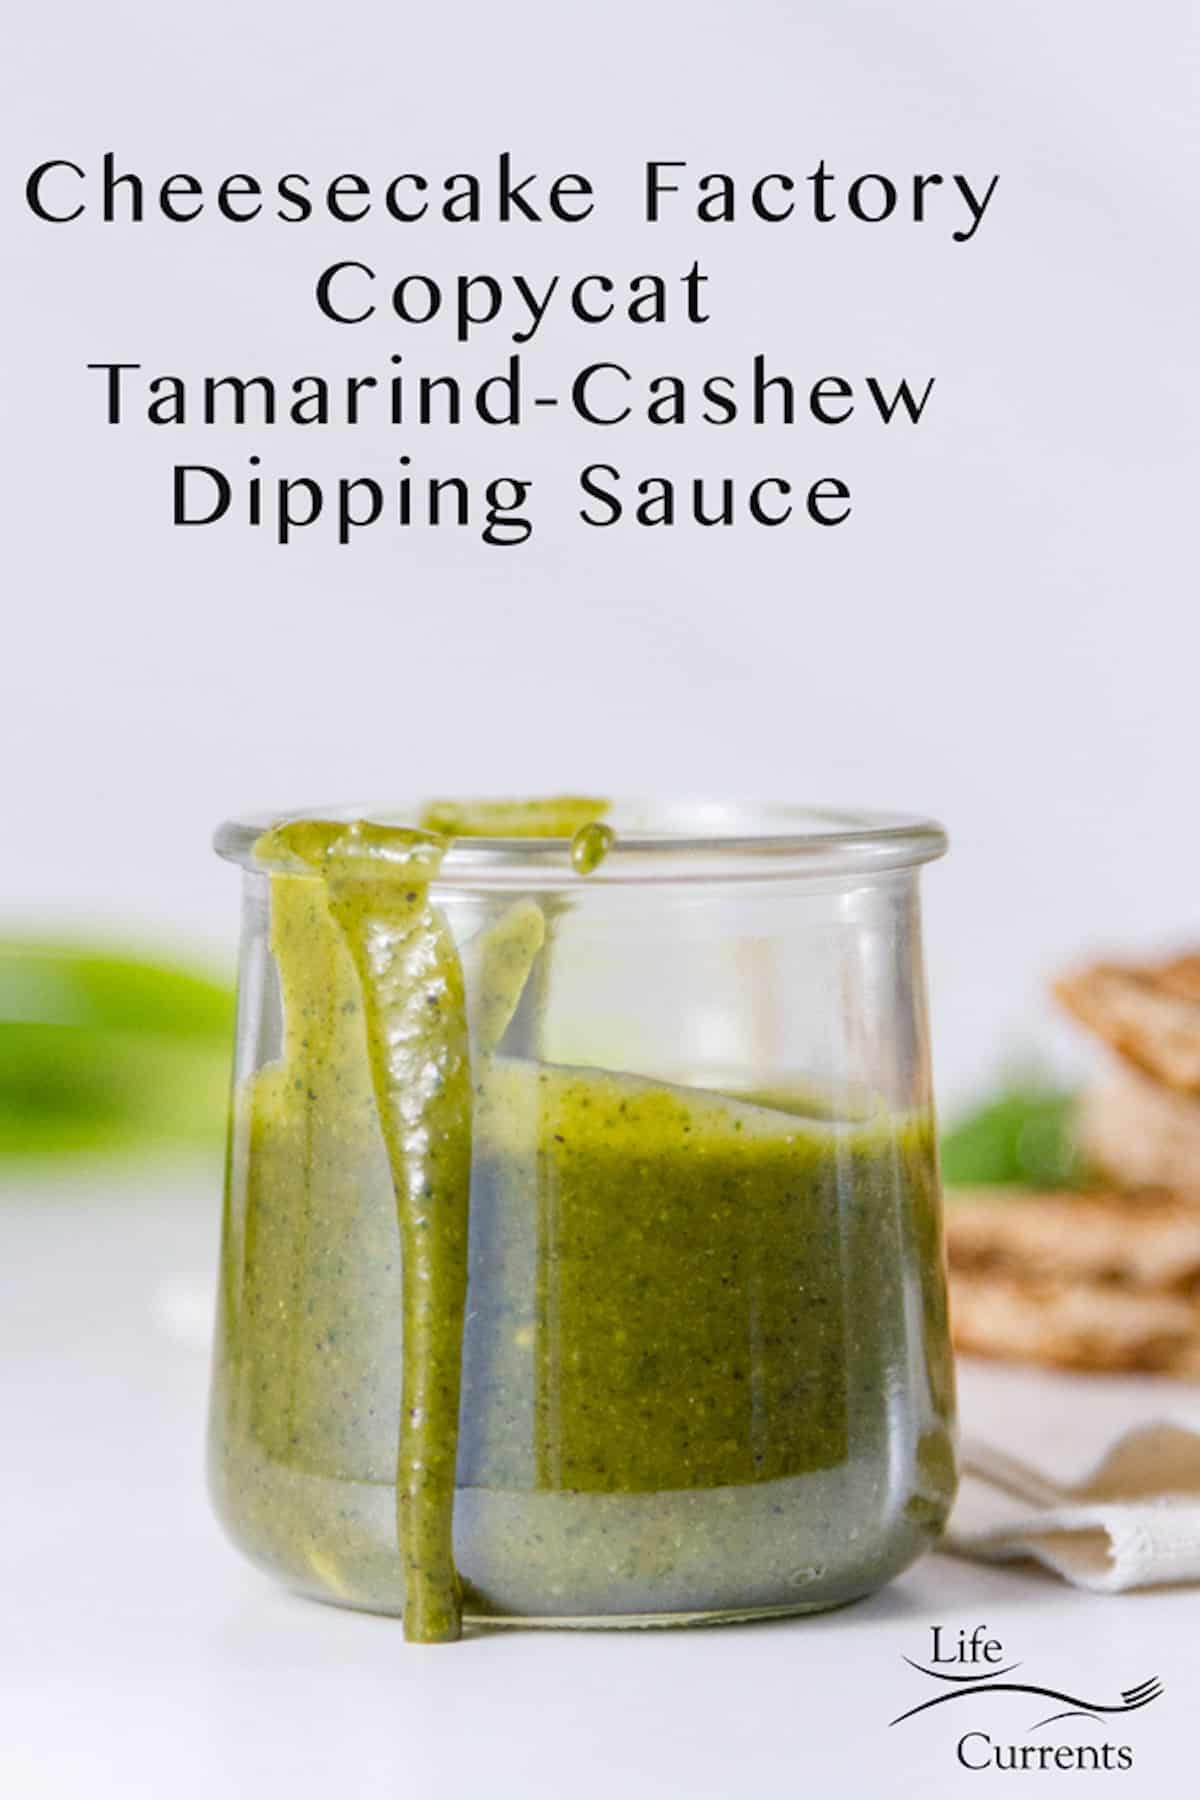 A green tamarind sauce in a glass container.